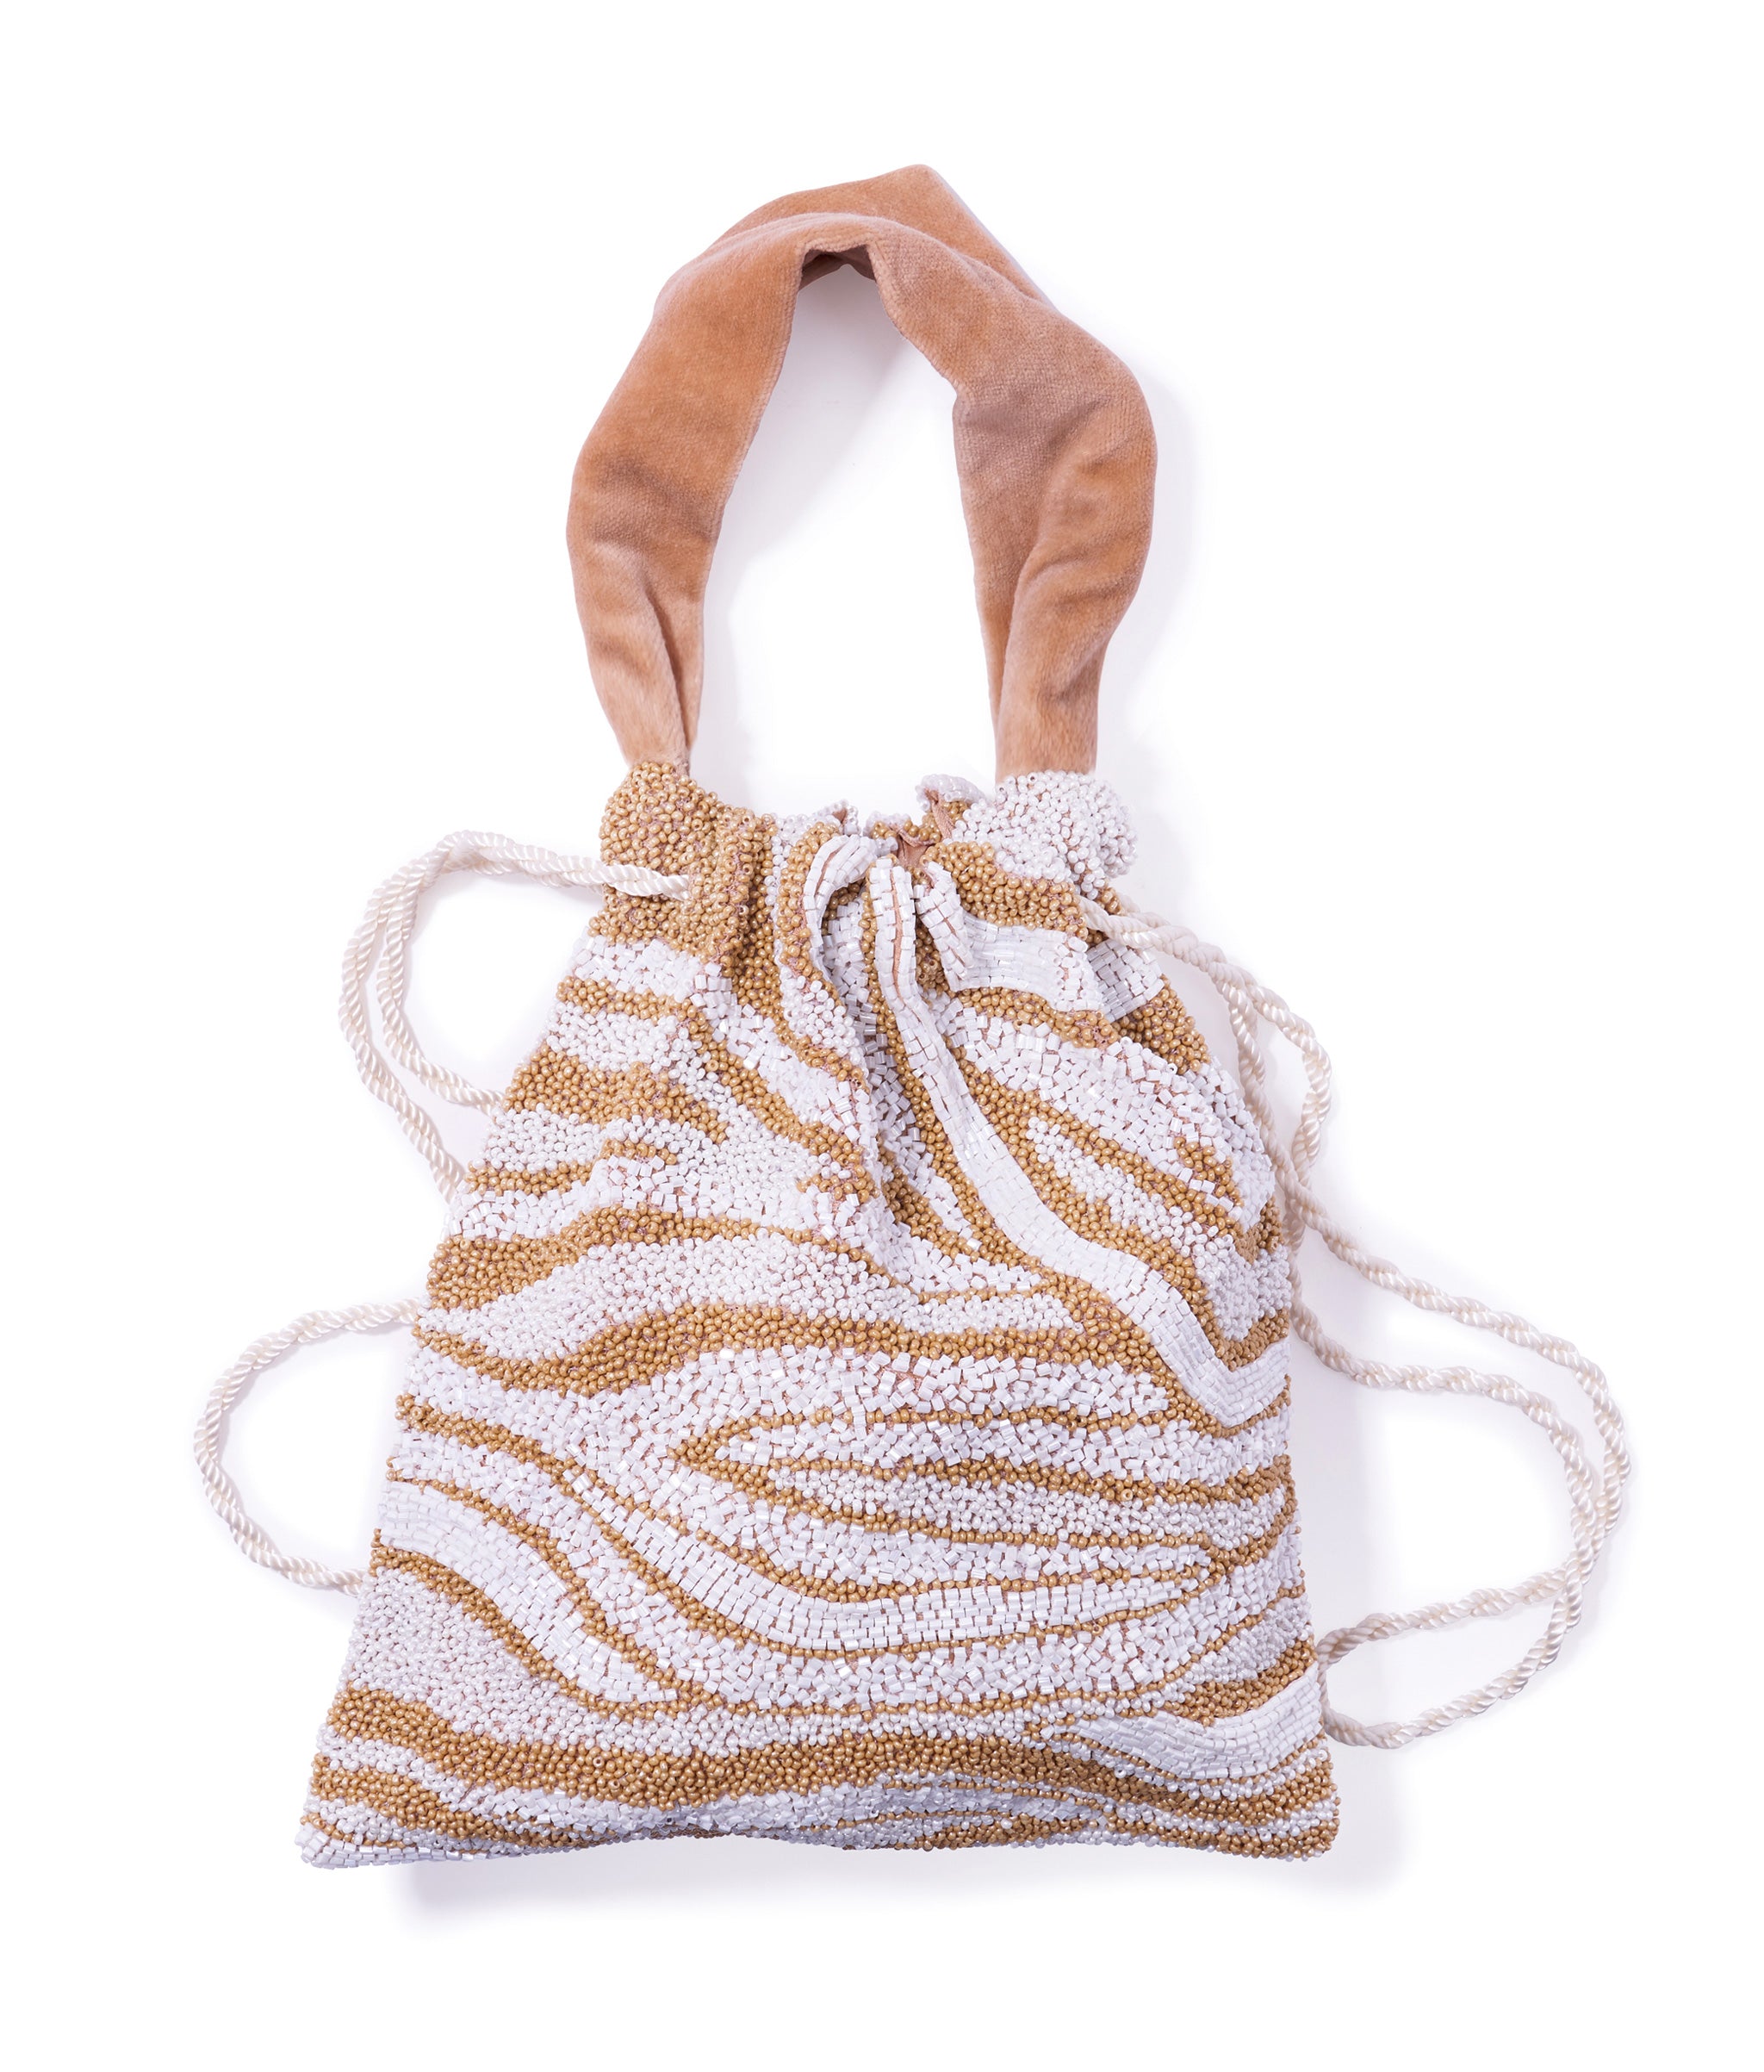 Gala Bag in Tan Zebra. Soft purse beaded with tan and ivory zebra-print pattern and tan velvet top handle. 